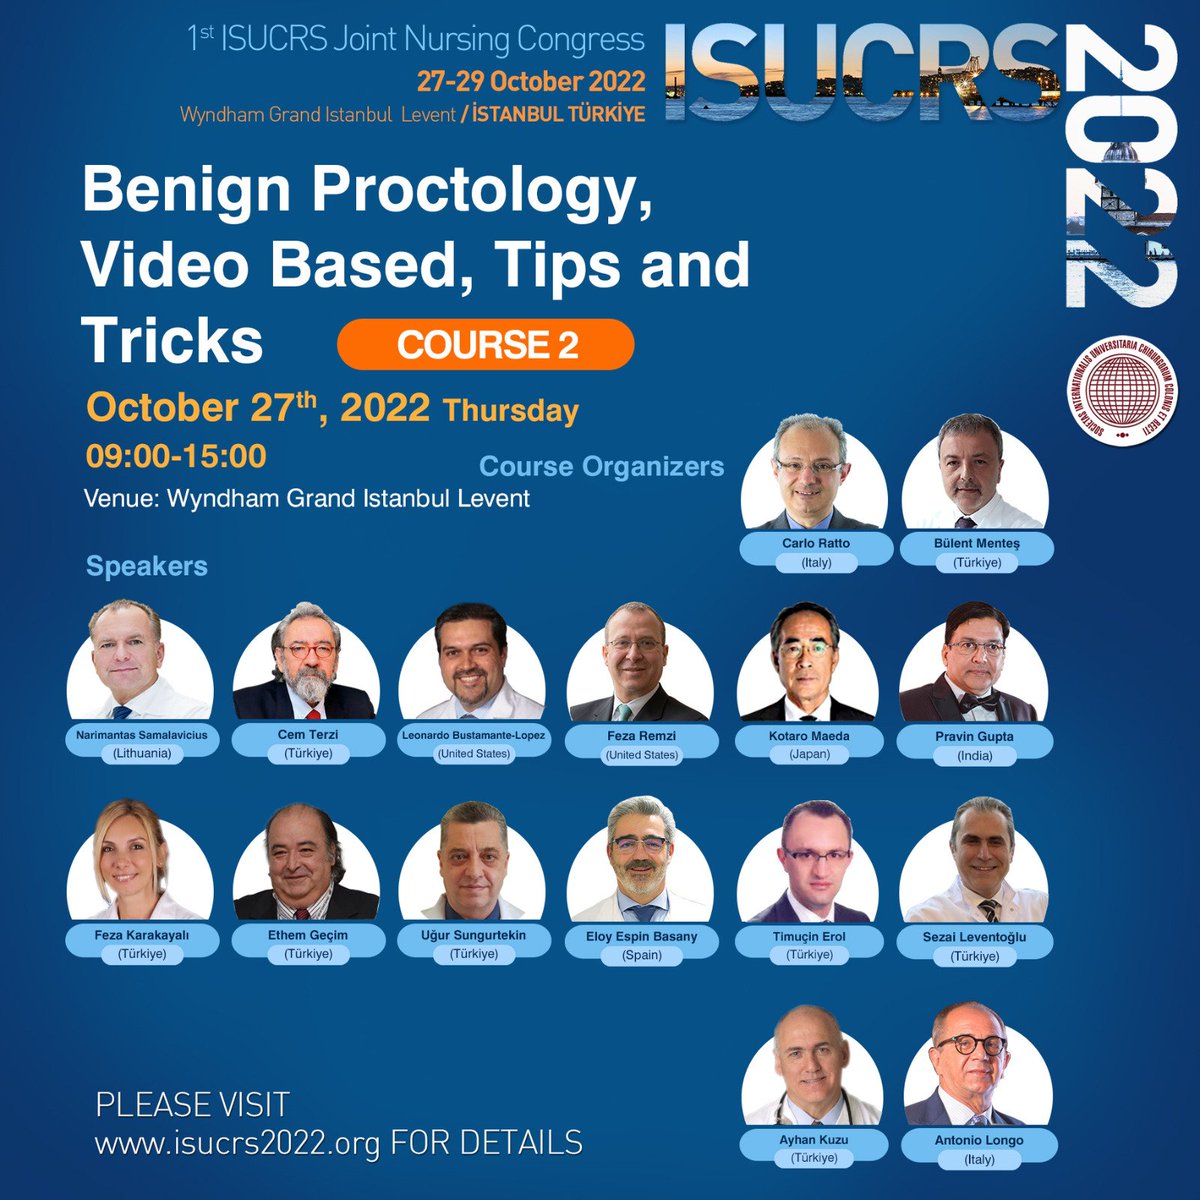 Benign Proctology, Video Based, Tips and Tricks Course 🔺️27 October 2022 🔻Wyndham Grand Levent İstanbul Visit isucrs2022.org for details #isucrs #isucrs2022 #isucrsistanbul